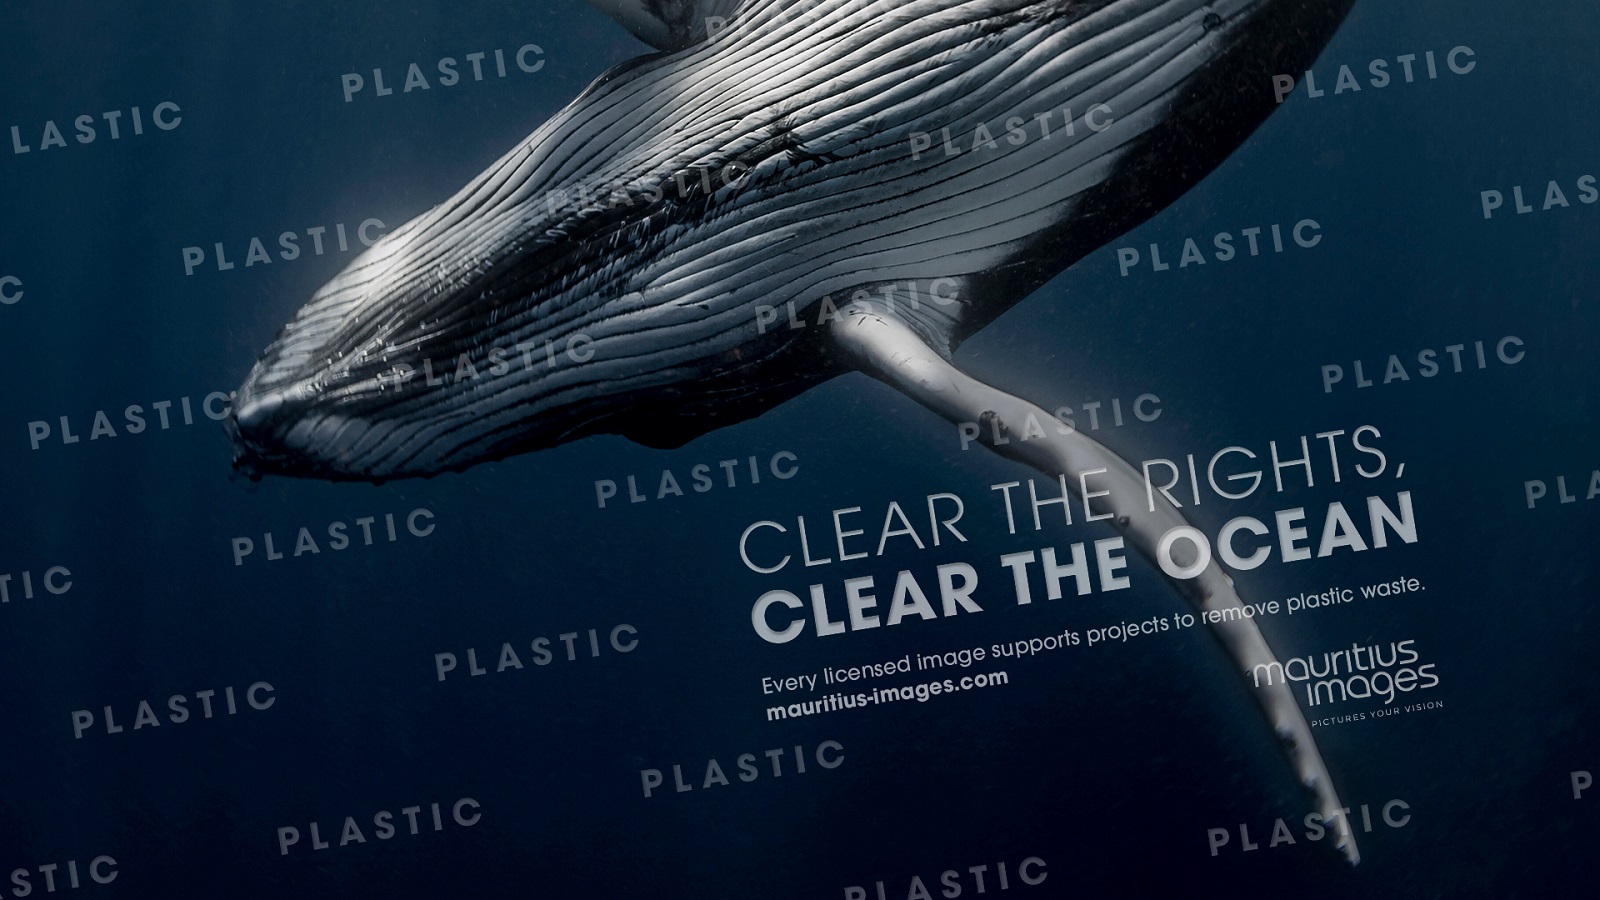 Stock Image Agency Rethinks Its Watermark to Help the Ocean